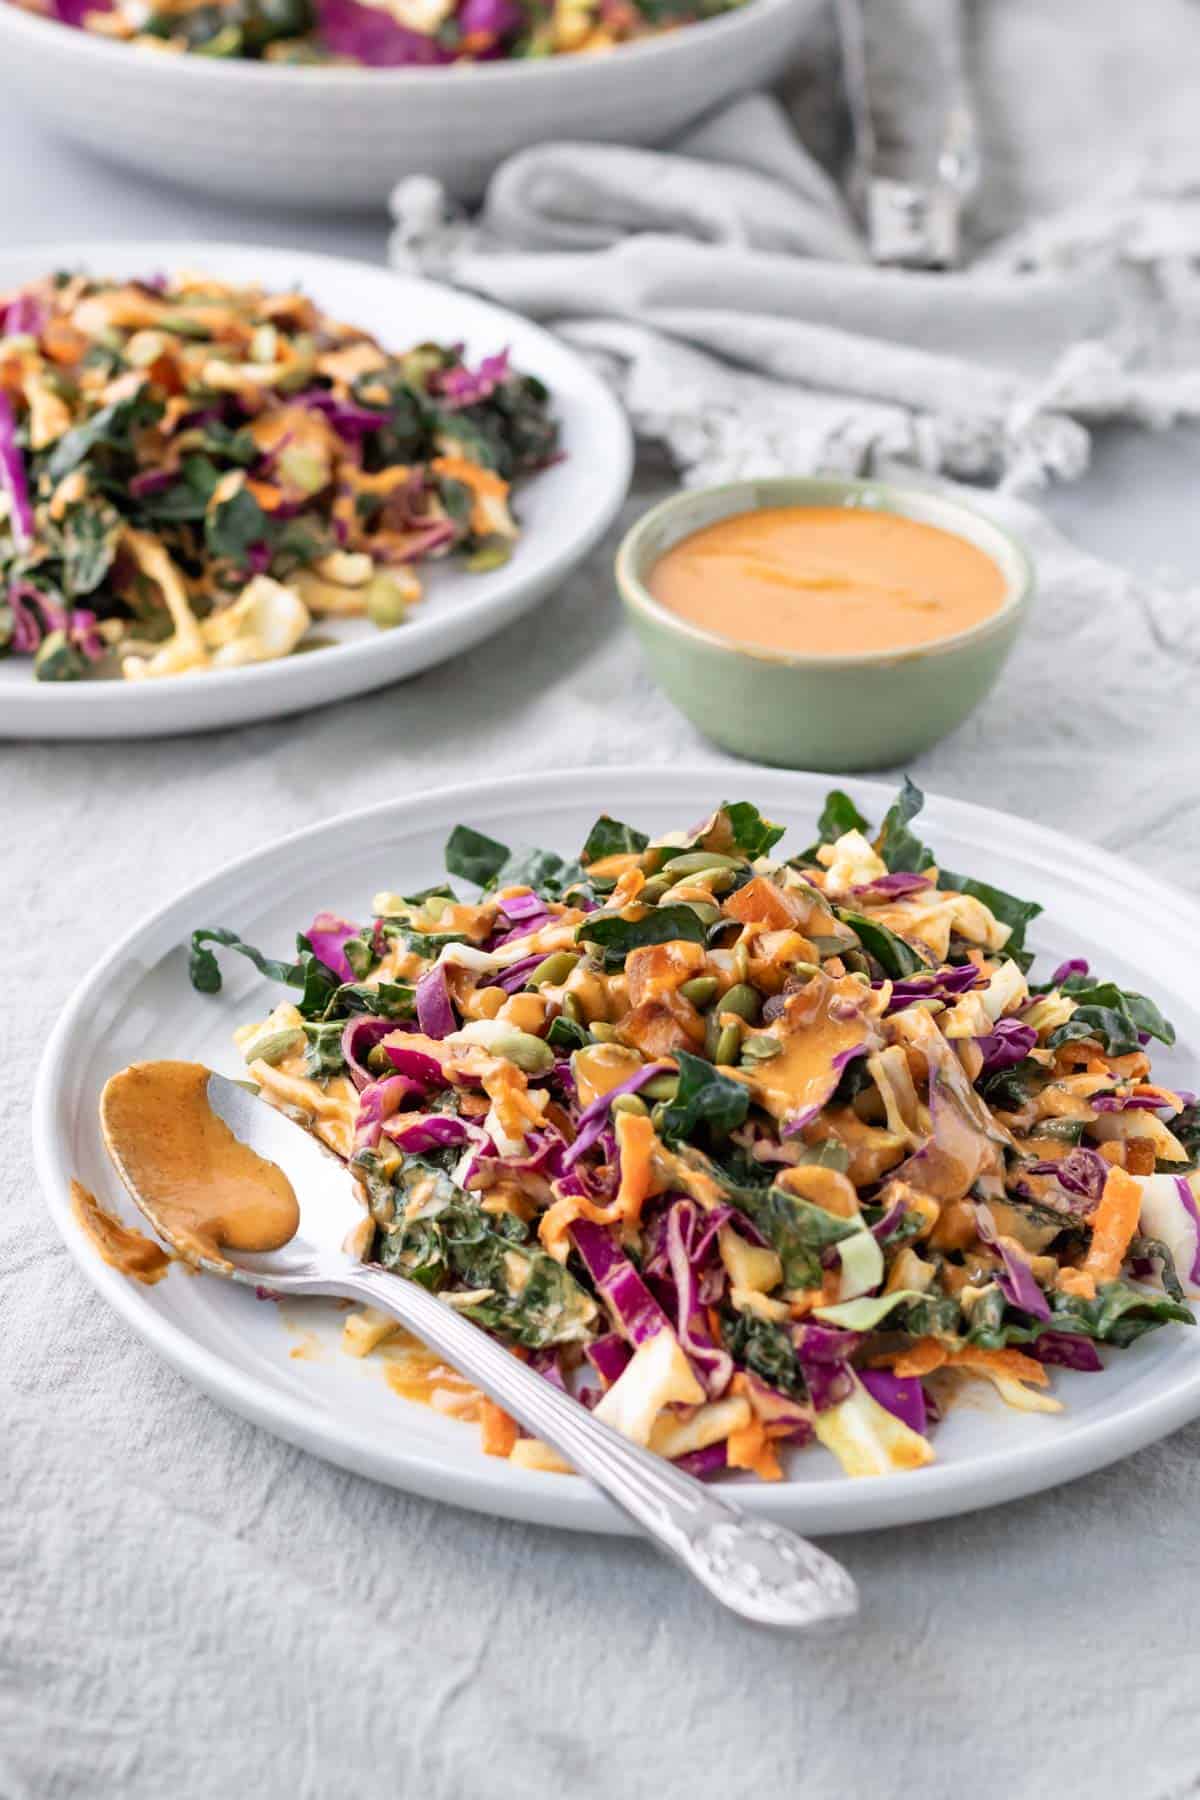 Colorful green kale and red cabbage dressed with creamy dressing.